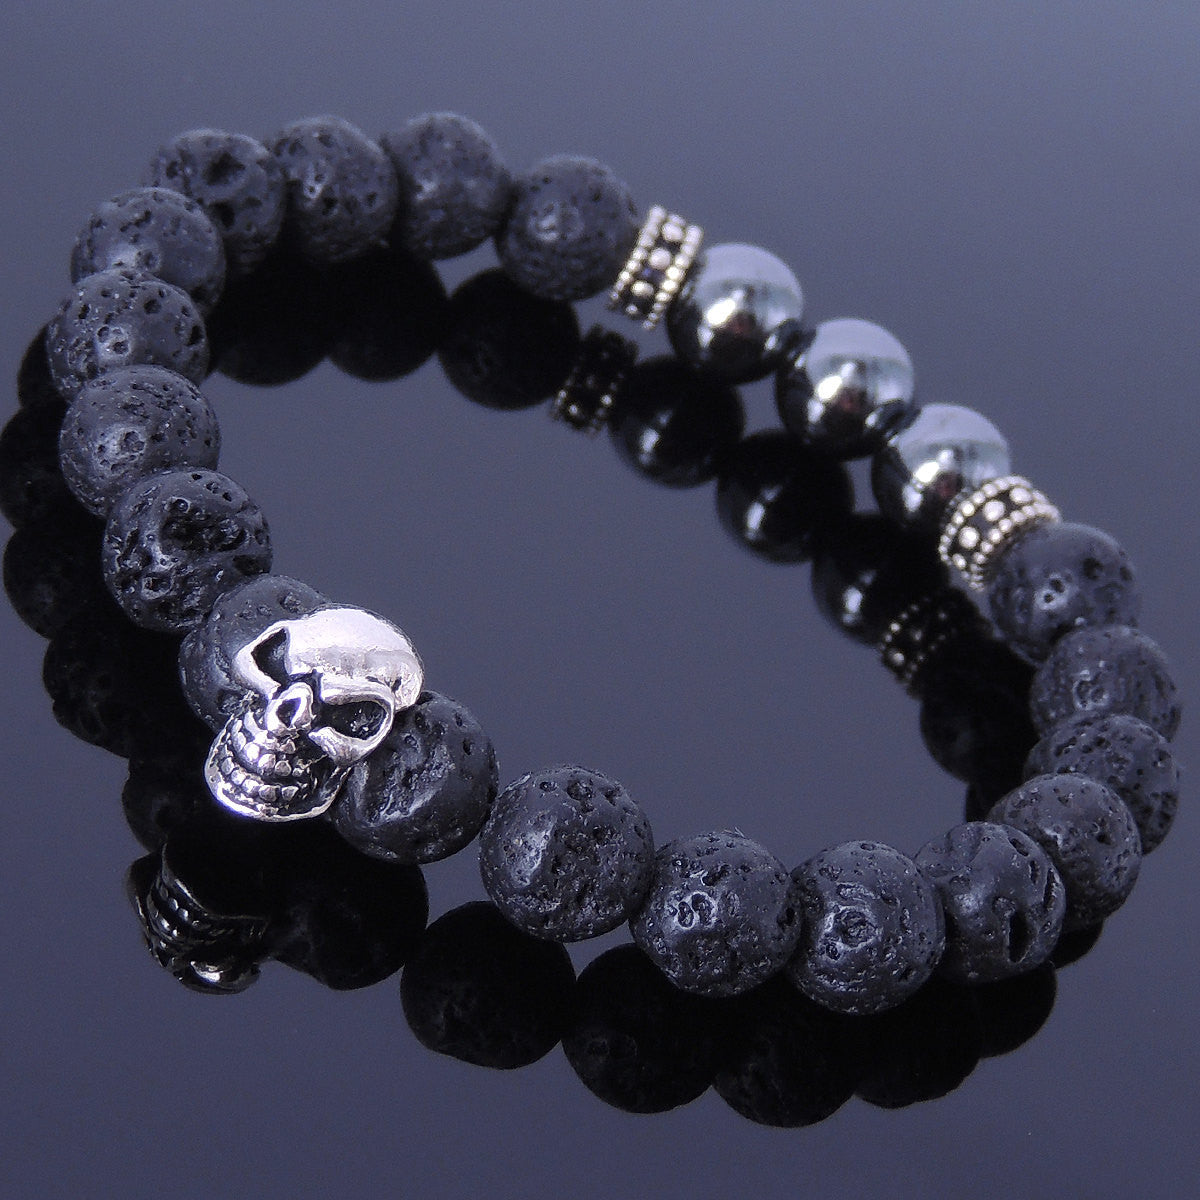 8mm Hematite & Lava Rock Healing Gemstone Bracelet with S925 Sterling Silver Spacers & Protection Skull Bead - Handmade by Gem & Silver BR317